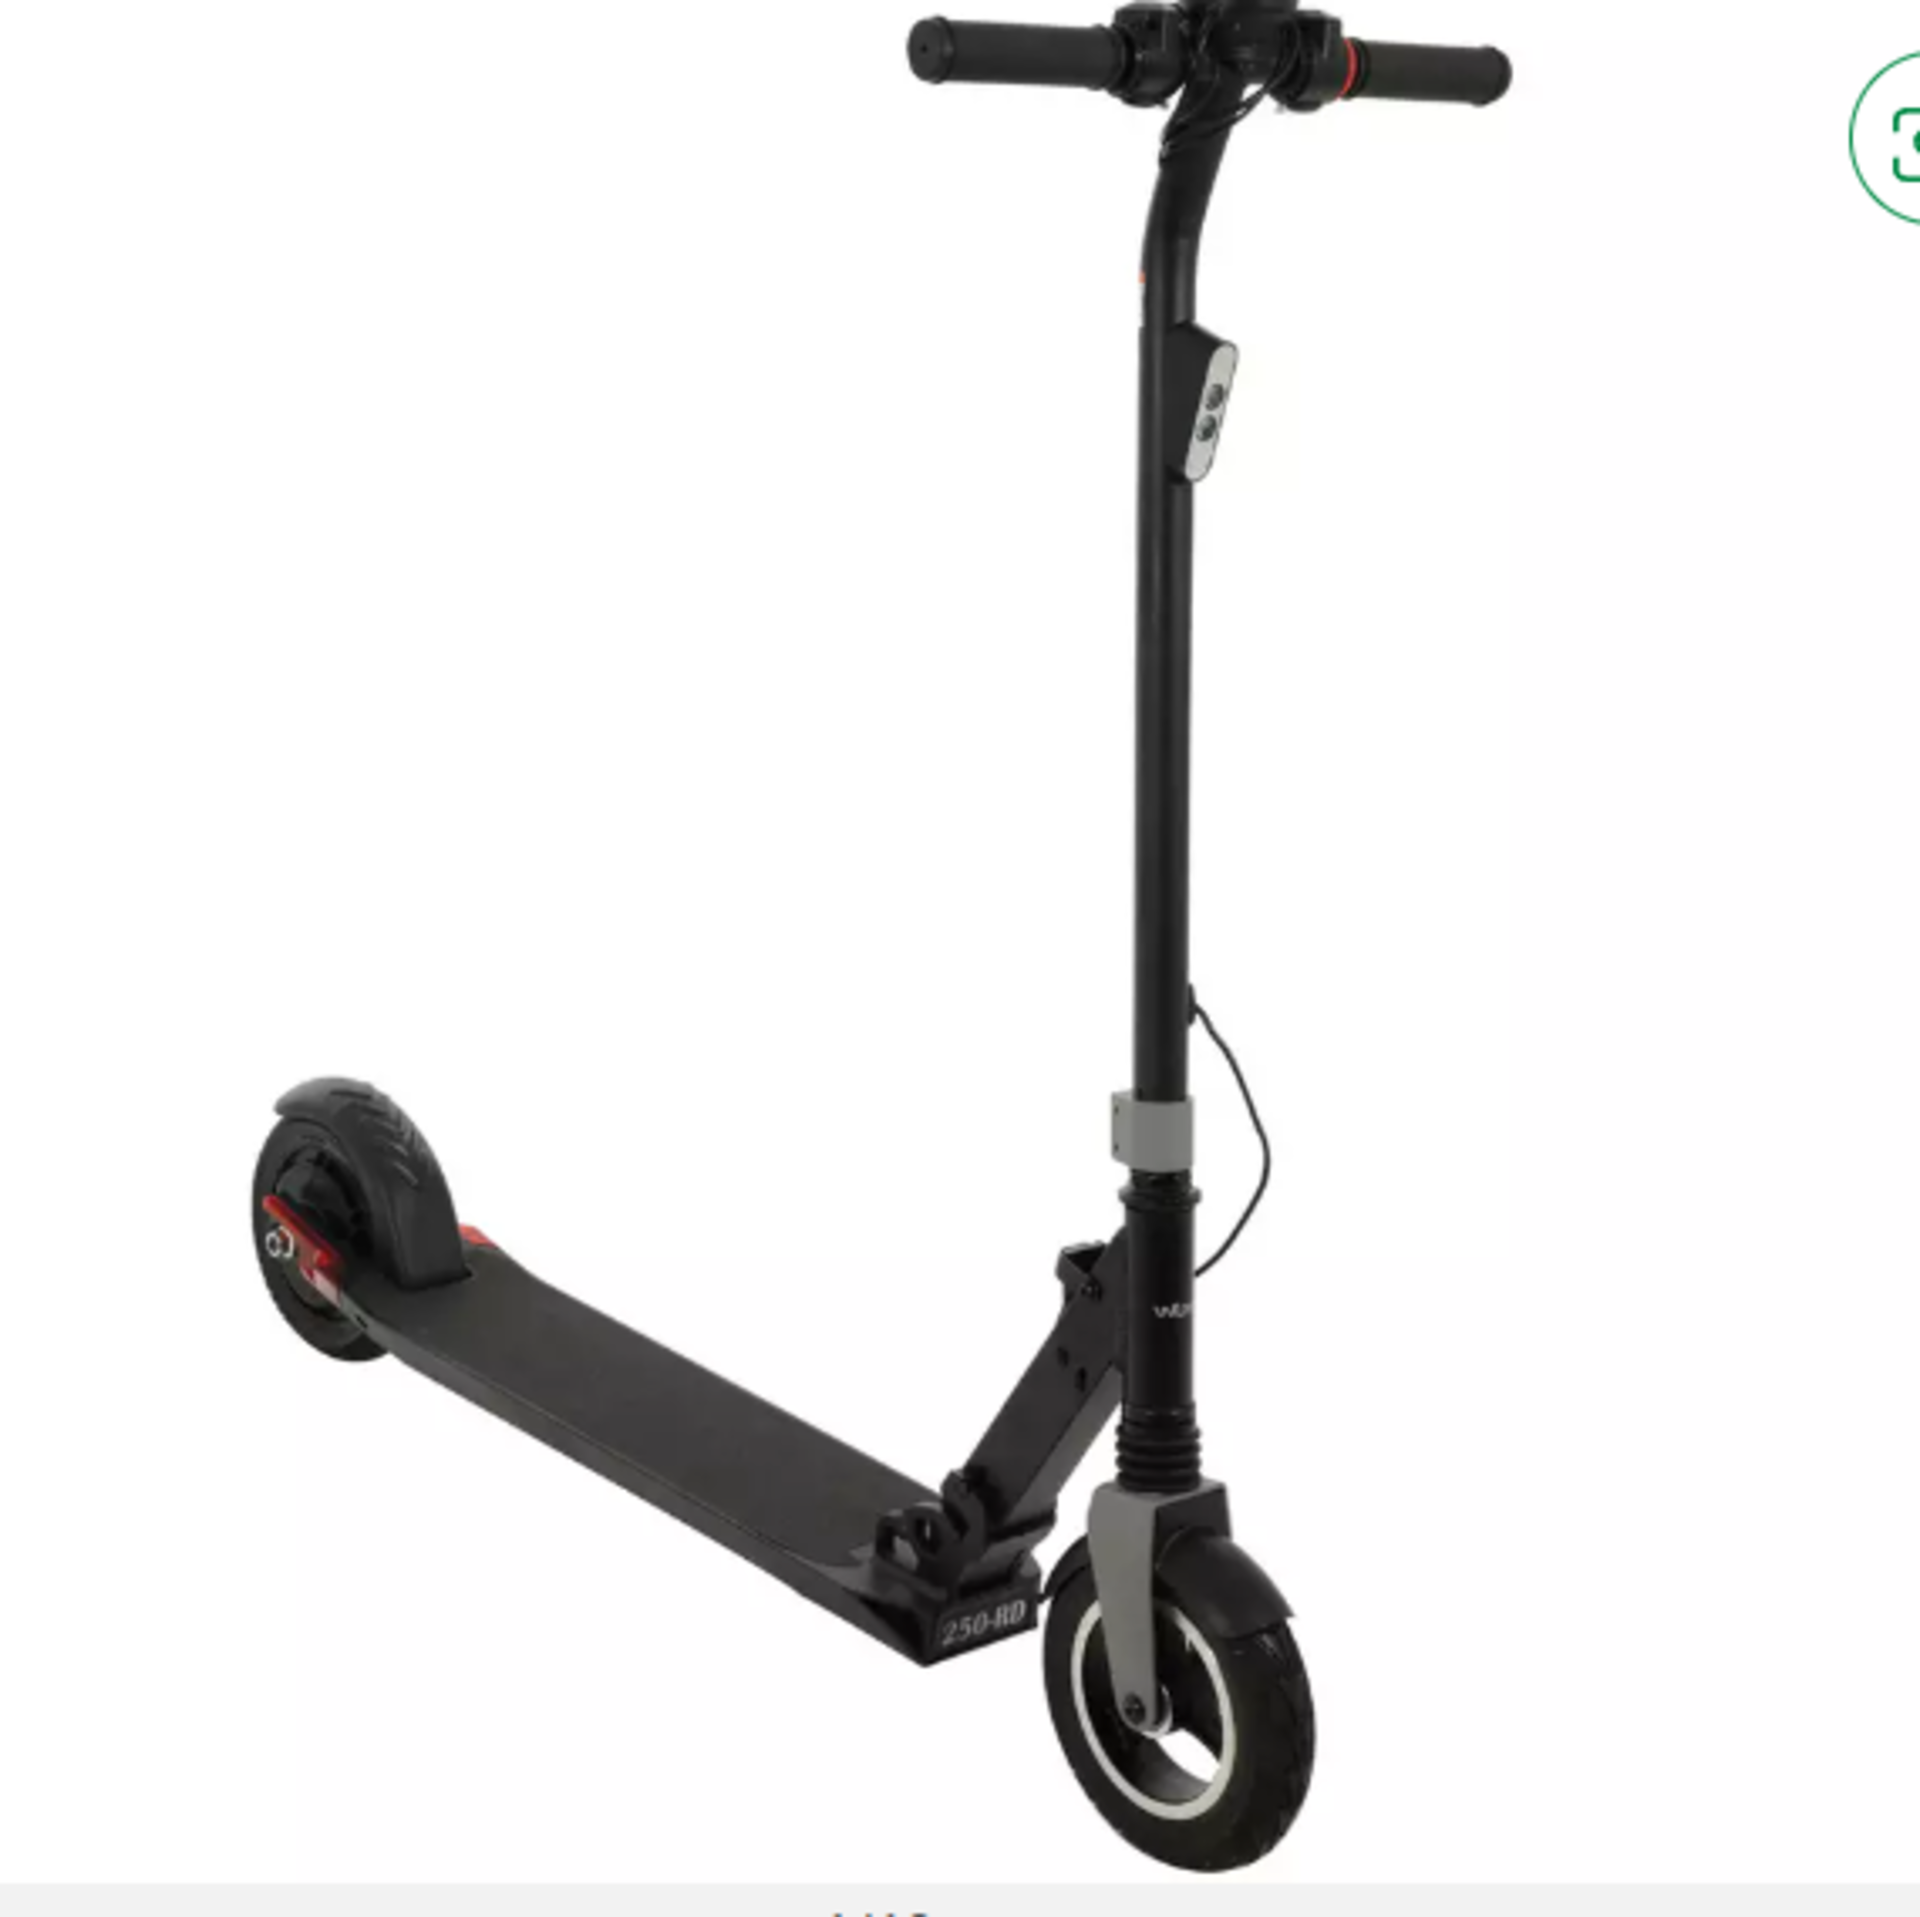 Wired 250 RD Electric Scooter. RRP £330.00. The WIRED 250 RD offers maximum quality and value for